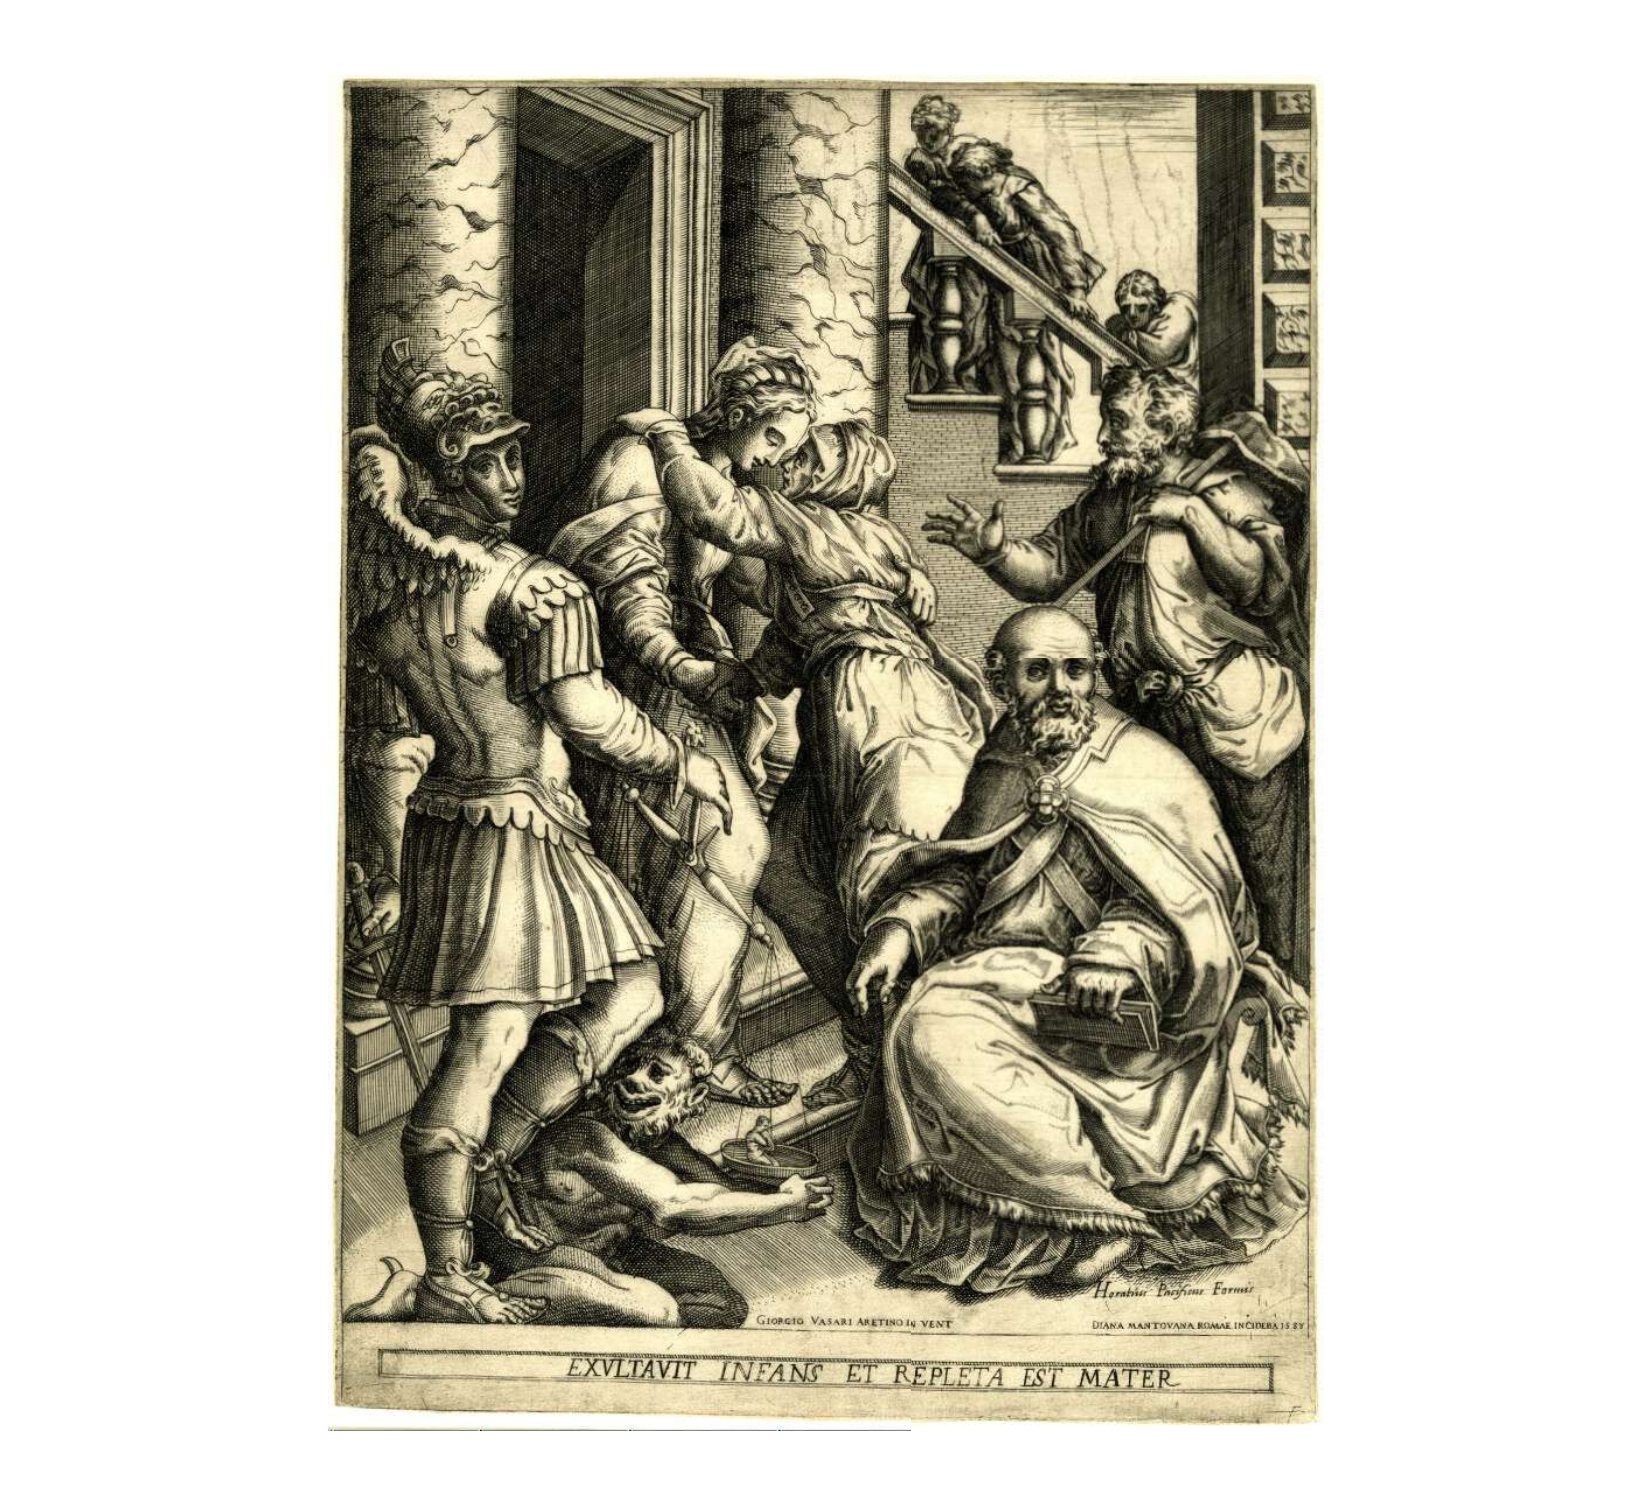 The primary figure group in this printed image consists of five figures, with two women embracing at the center. An older man is seated holding a book, while an angel in a suit of armor stands next to the women, looking over his shoulder directly at the viewer. Other man reaches towards the two women with one hand. Behind them, there are three figures on a staircase who are crying and comforting one another.